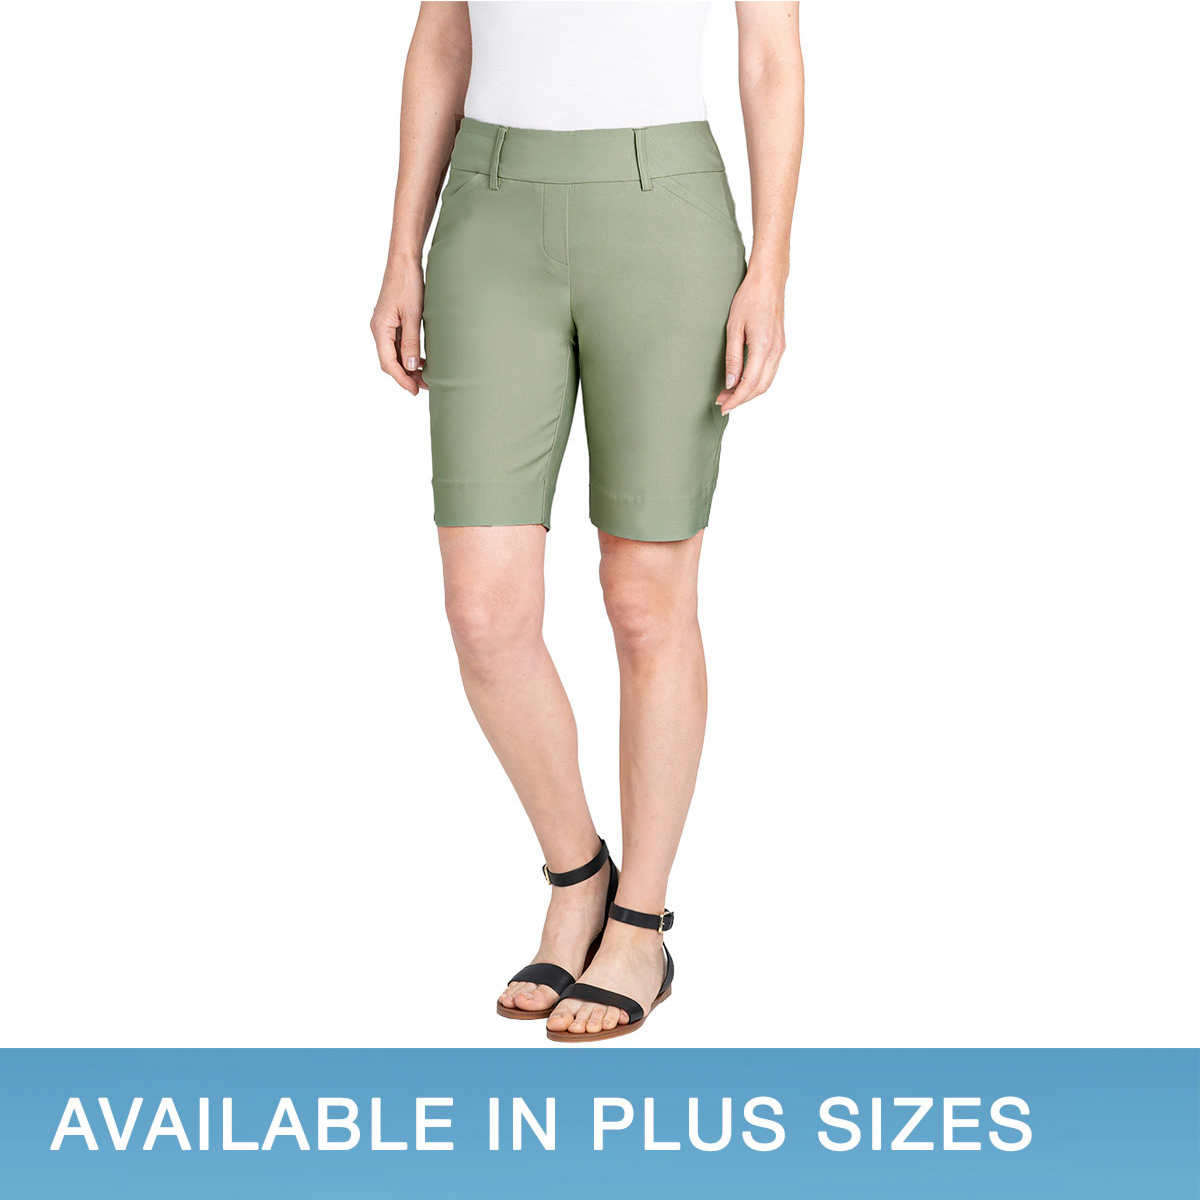 Women's New Green Soft Touch Knee Length Shorts Sizes 10 to 14 Ex Store 